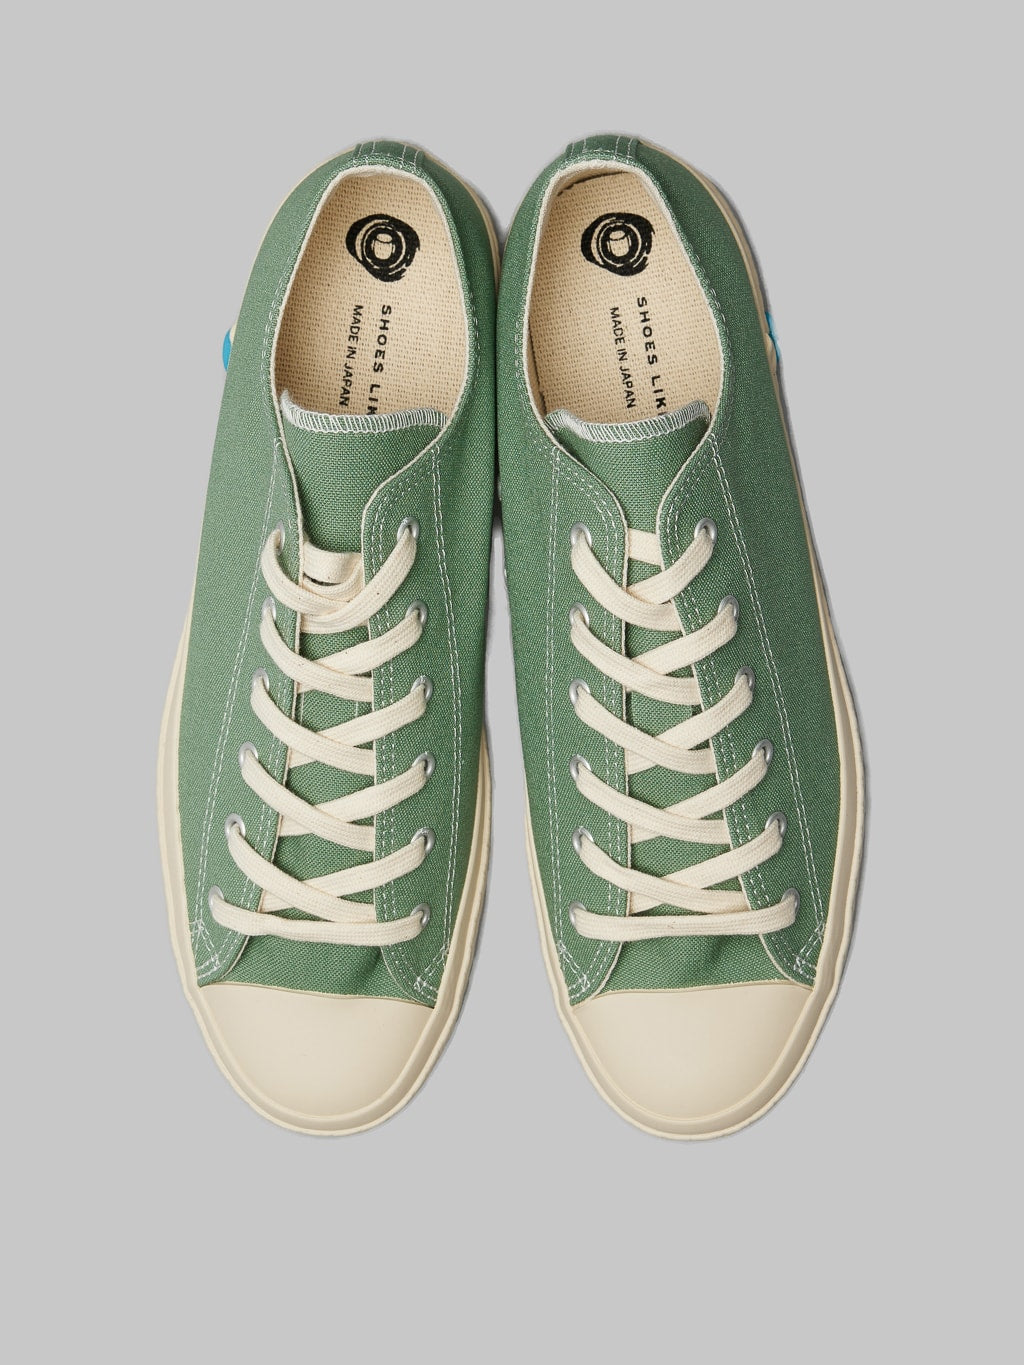 Shoes like pottery low sneaker green up view